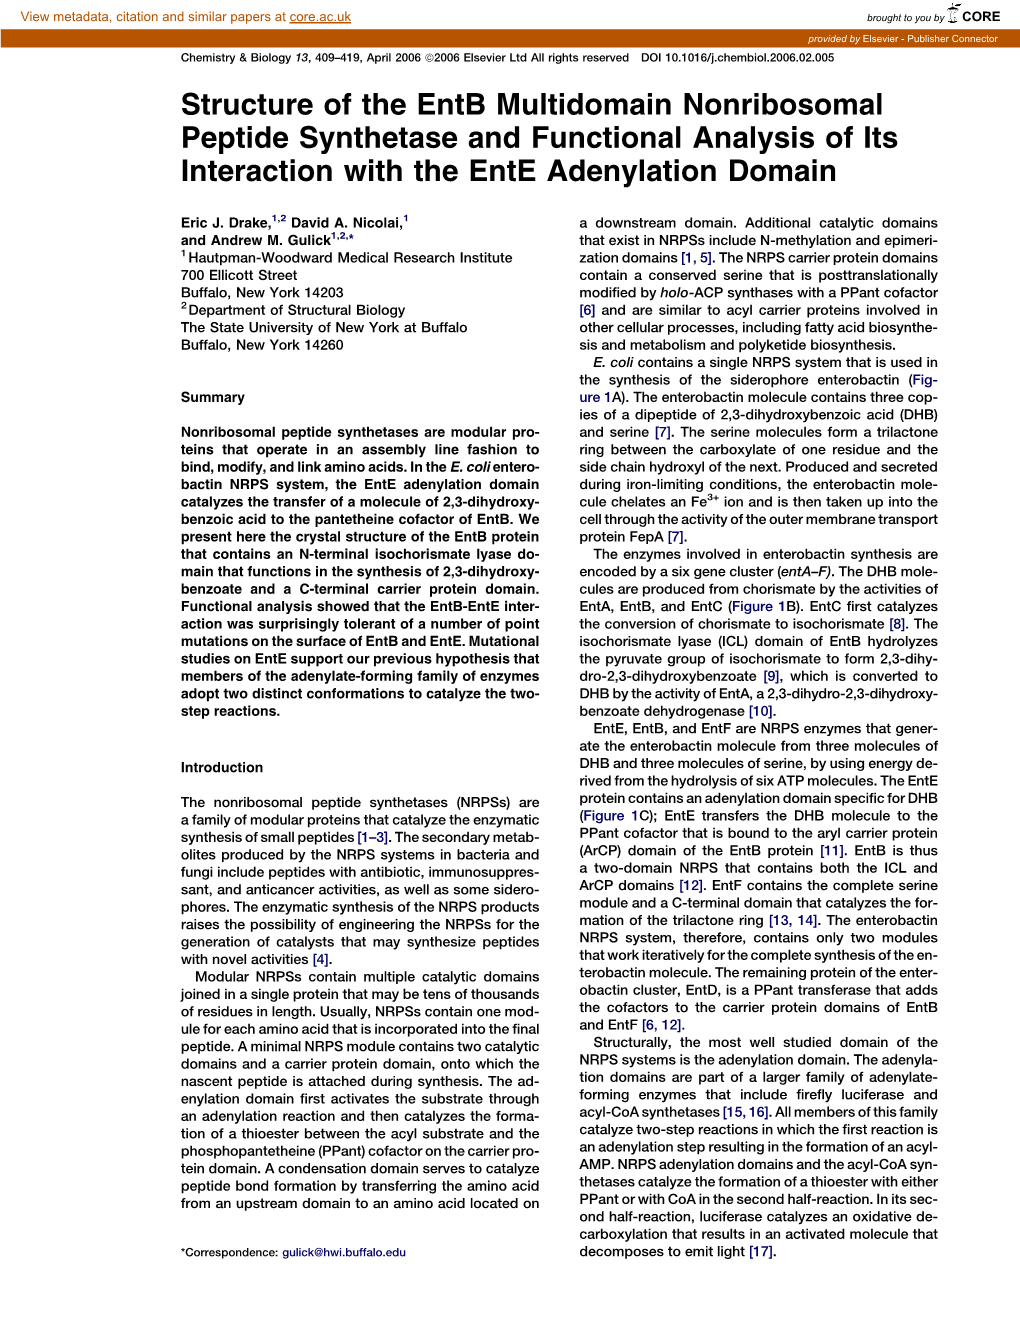 Structure of the Entb Multidomain Nonribosomal Peptide Synthetase and Functional Analysis of Its Interaction with the Ente Adenylation Domain